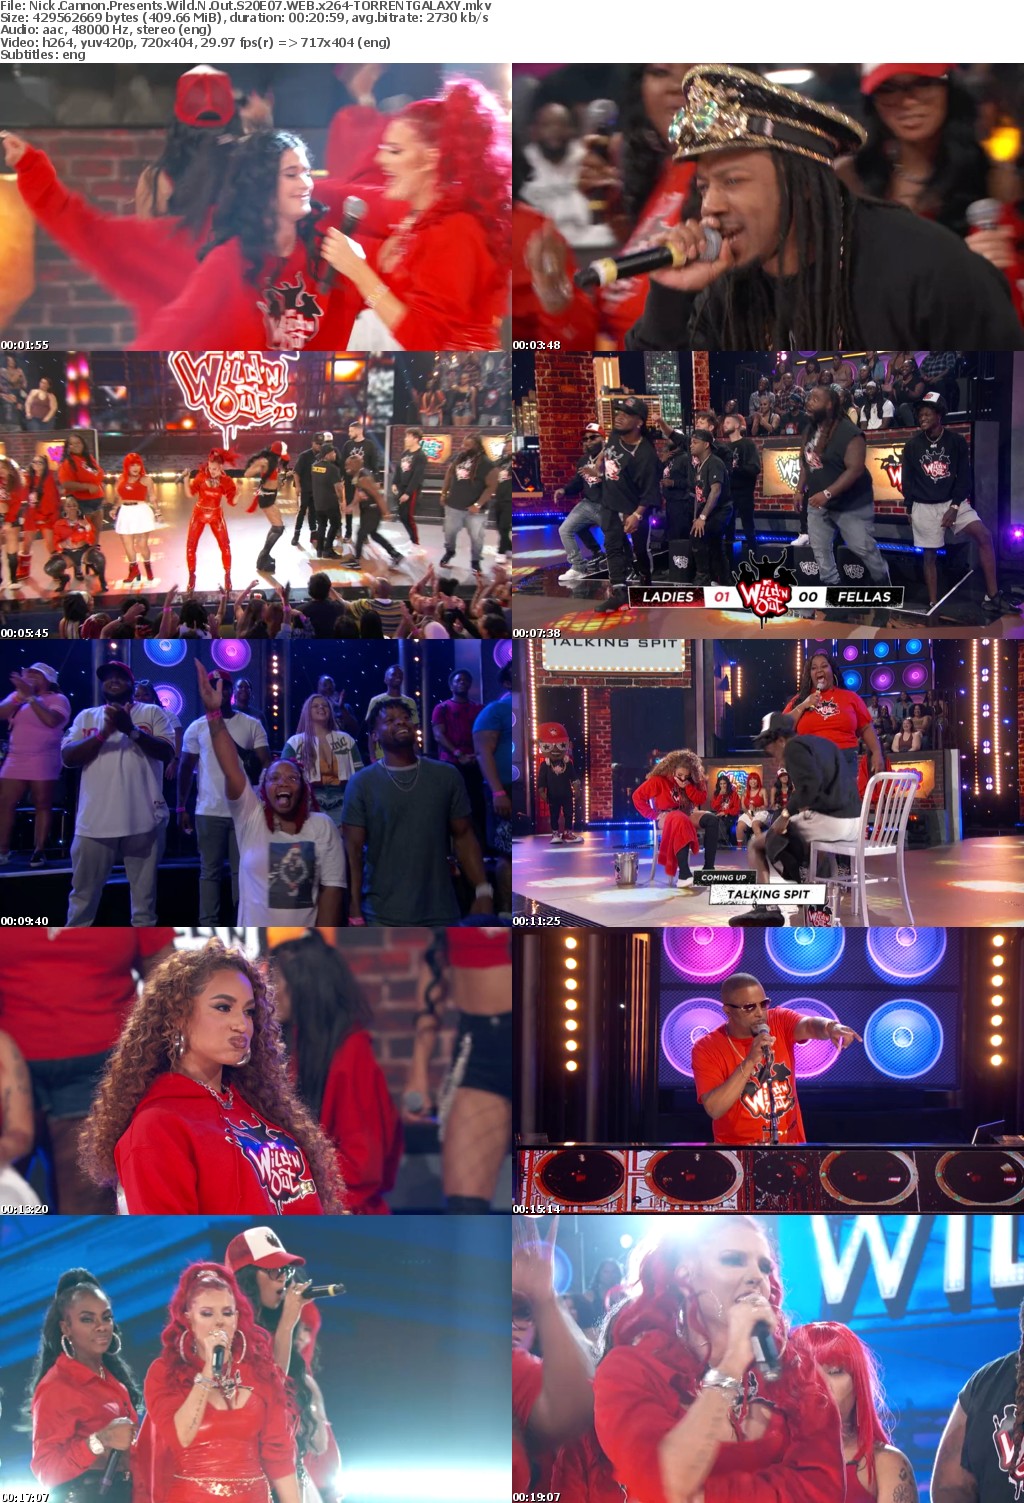 Nick Cannon Presents Wild N Out S20E07 WEB x264-GALAXY